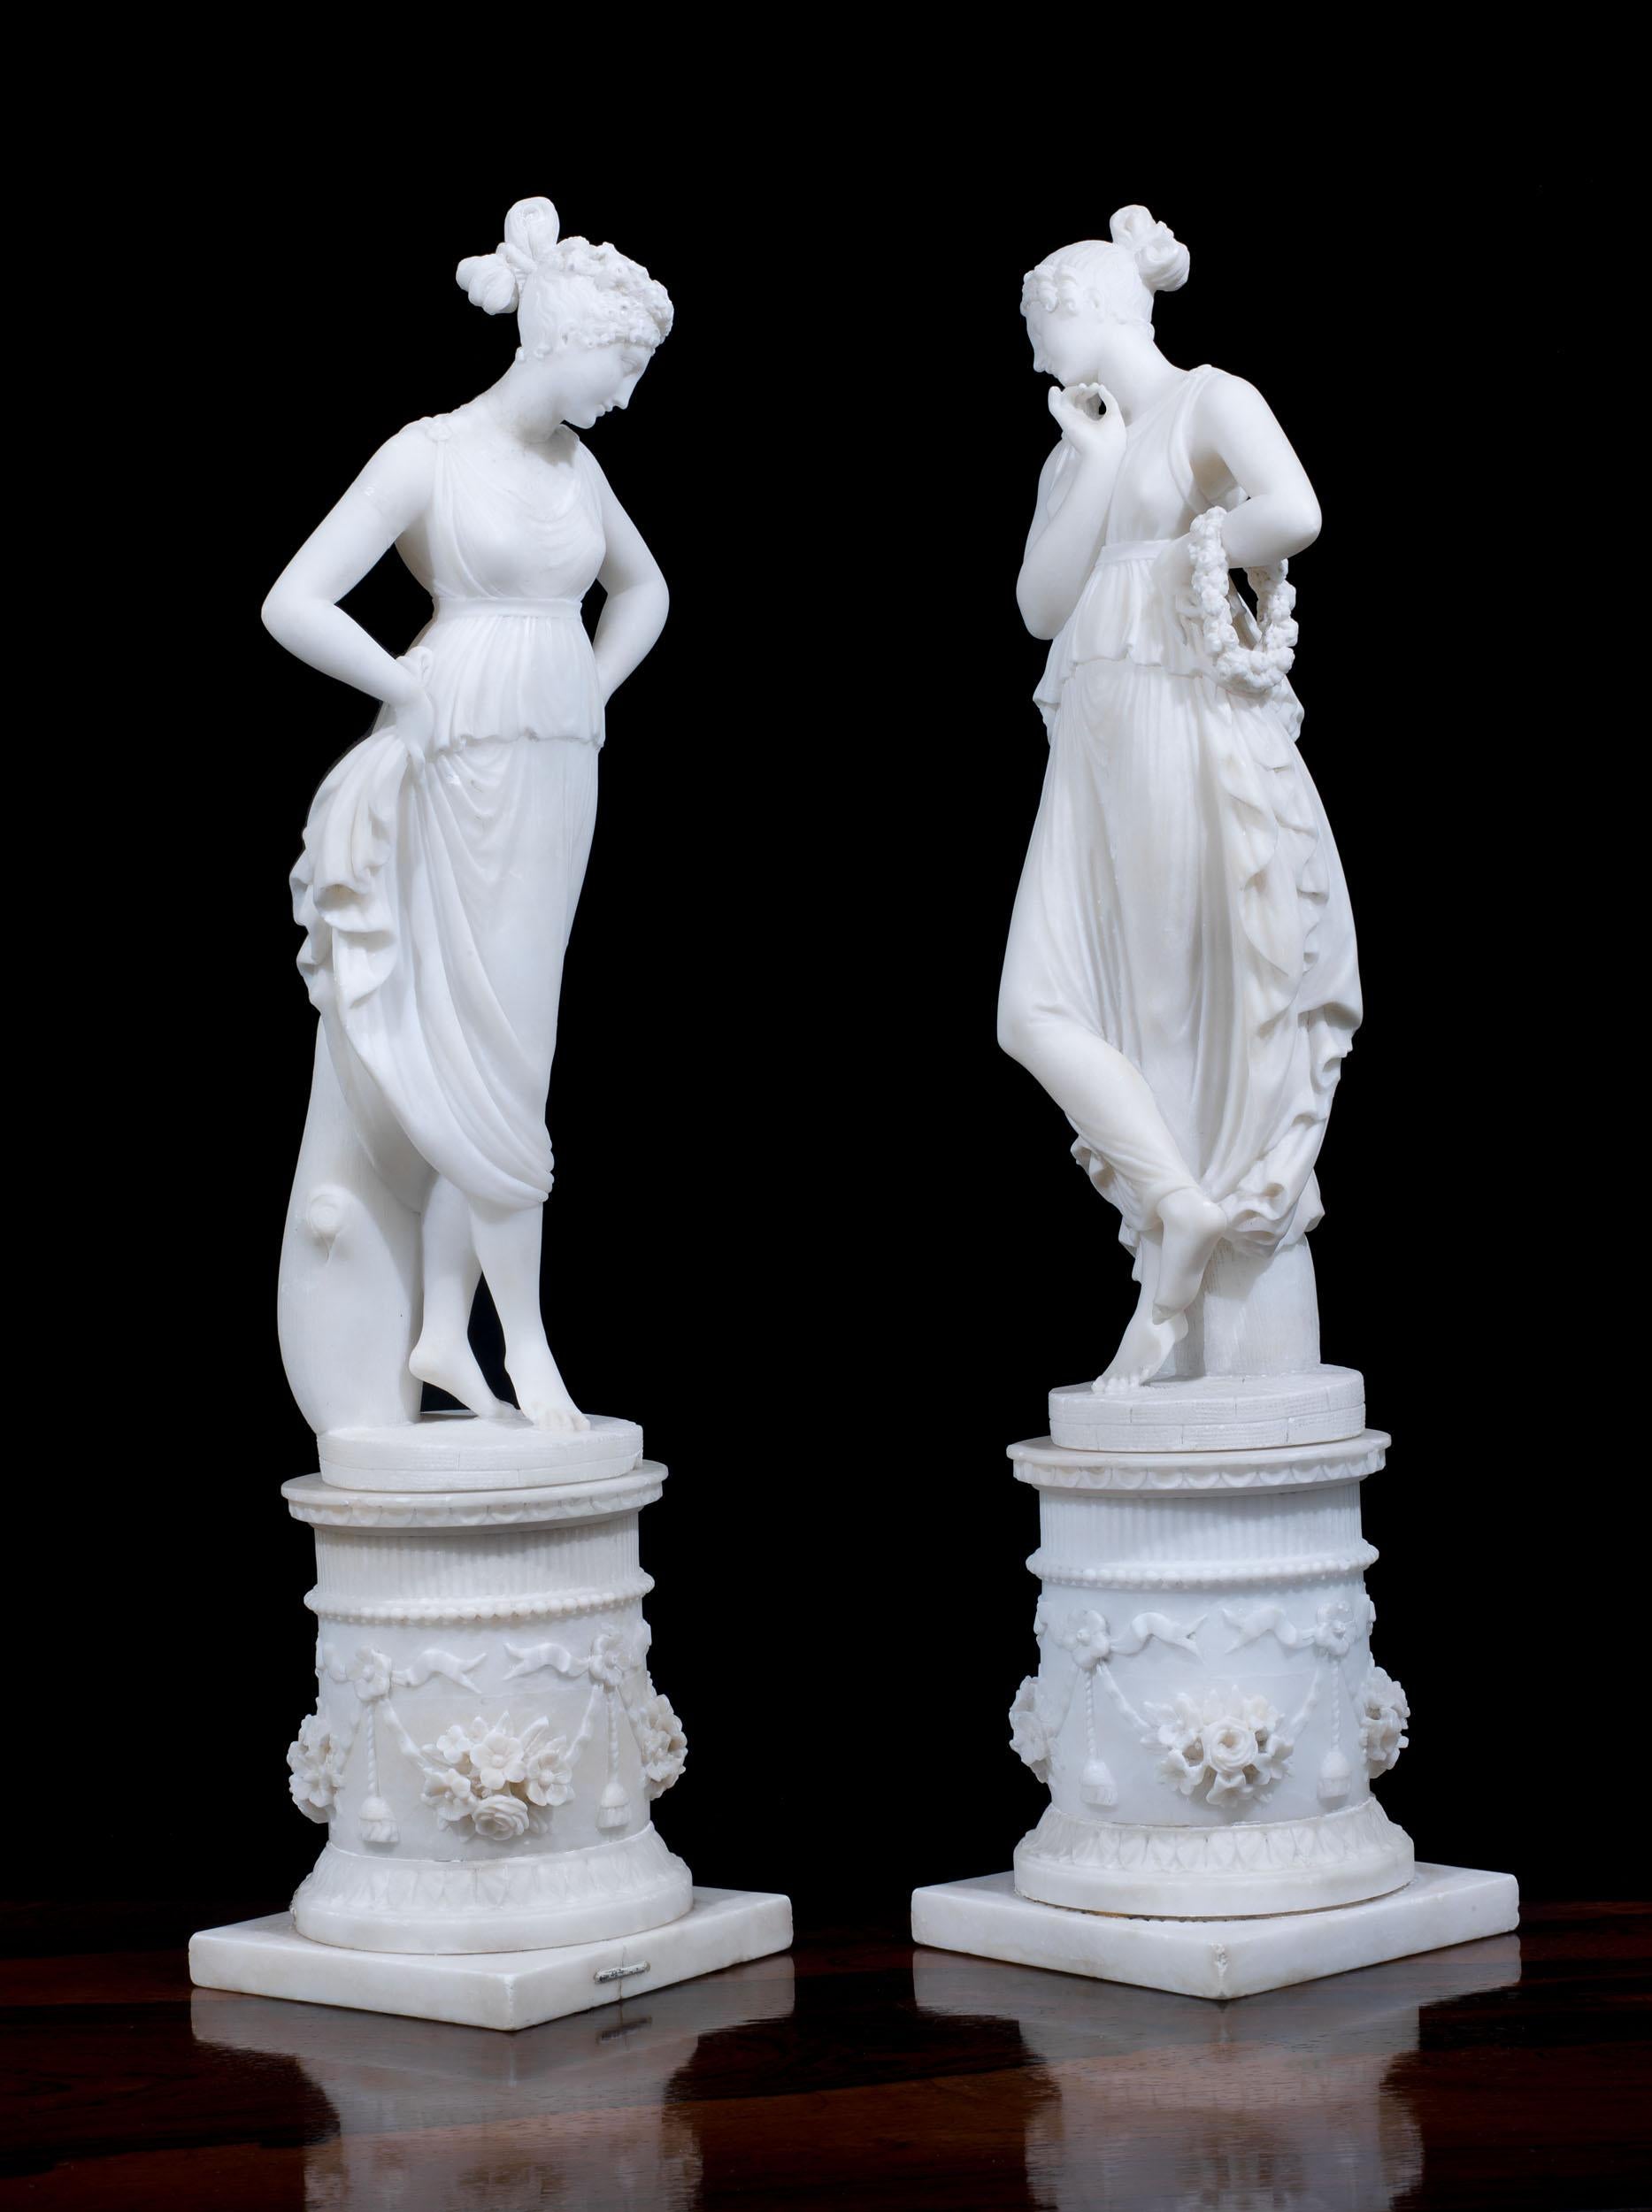 A pair of very finely carved 19th century alabaster figures of muses, in classical dress, each standing on circular pedestals intricately carved with flowers and beading, Italian, c.1850.